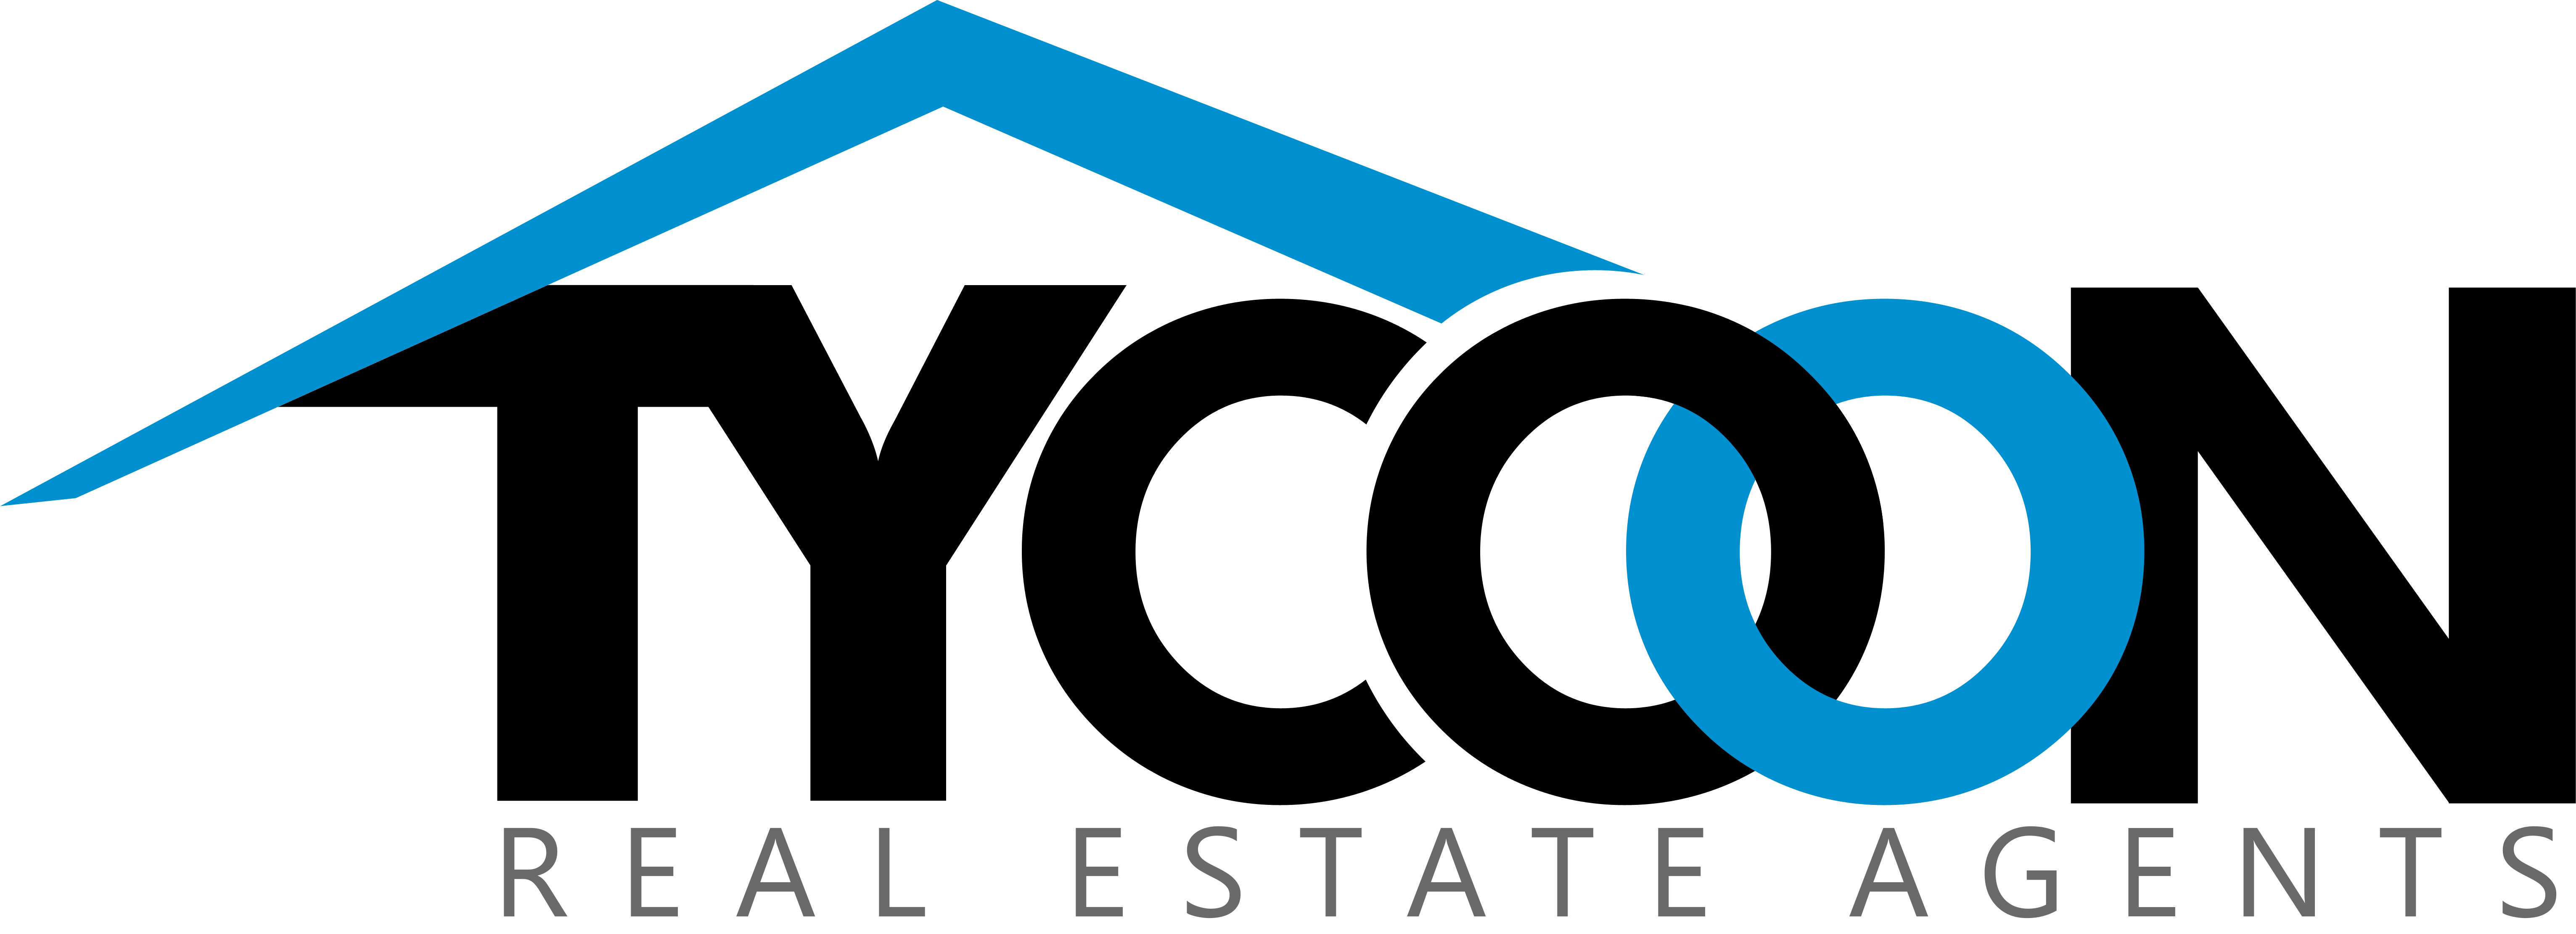 Tycoon Logo - Tycoon Real Estate – A Real Estate Agency you can Trust